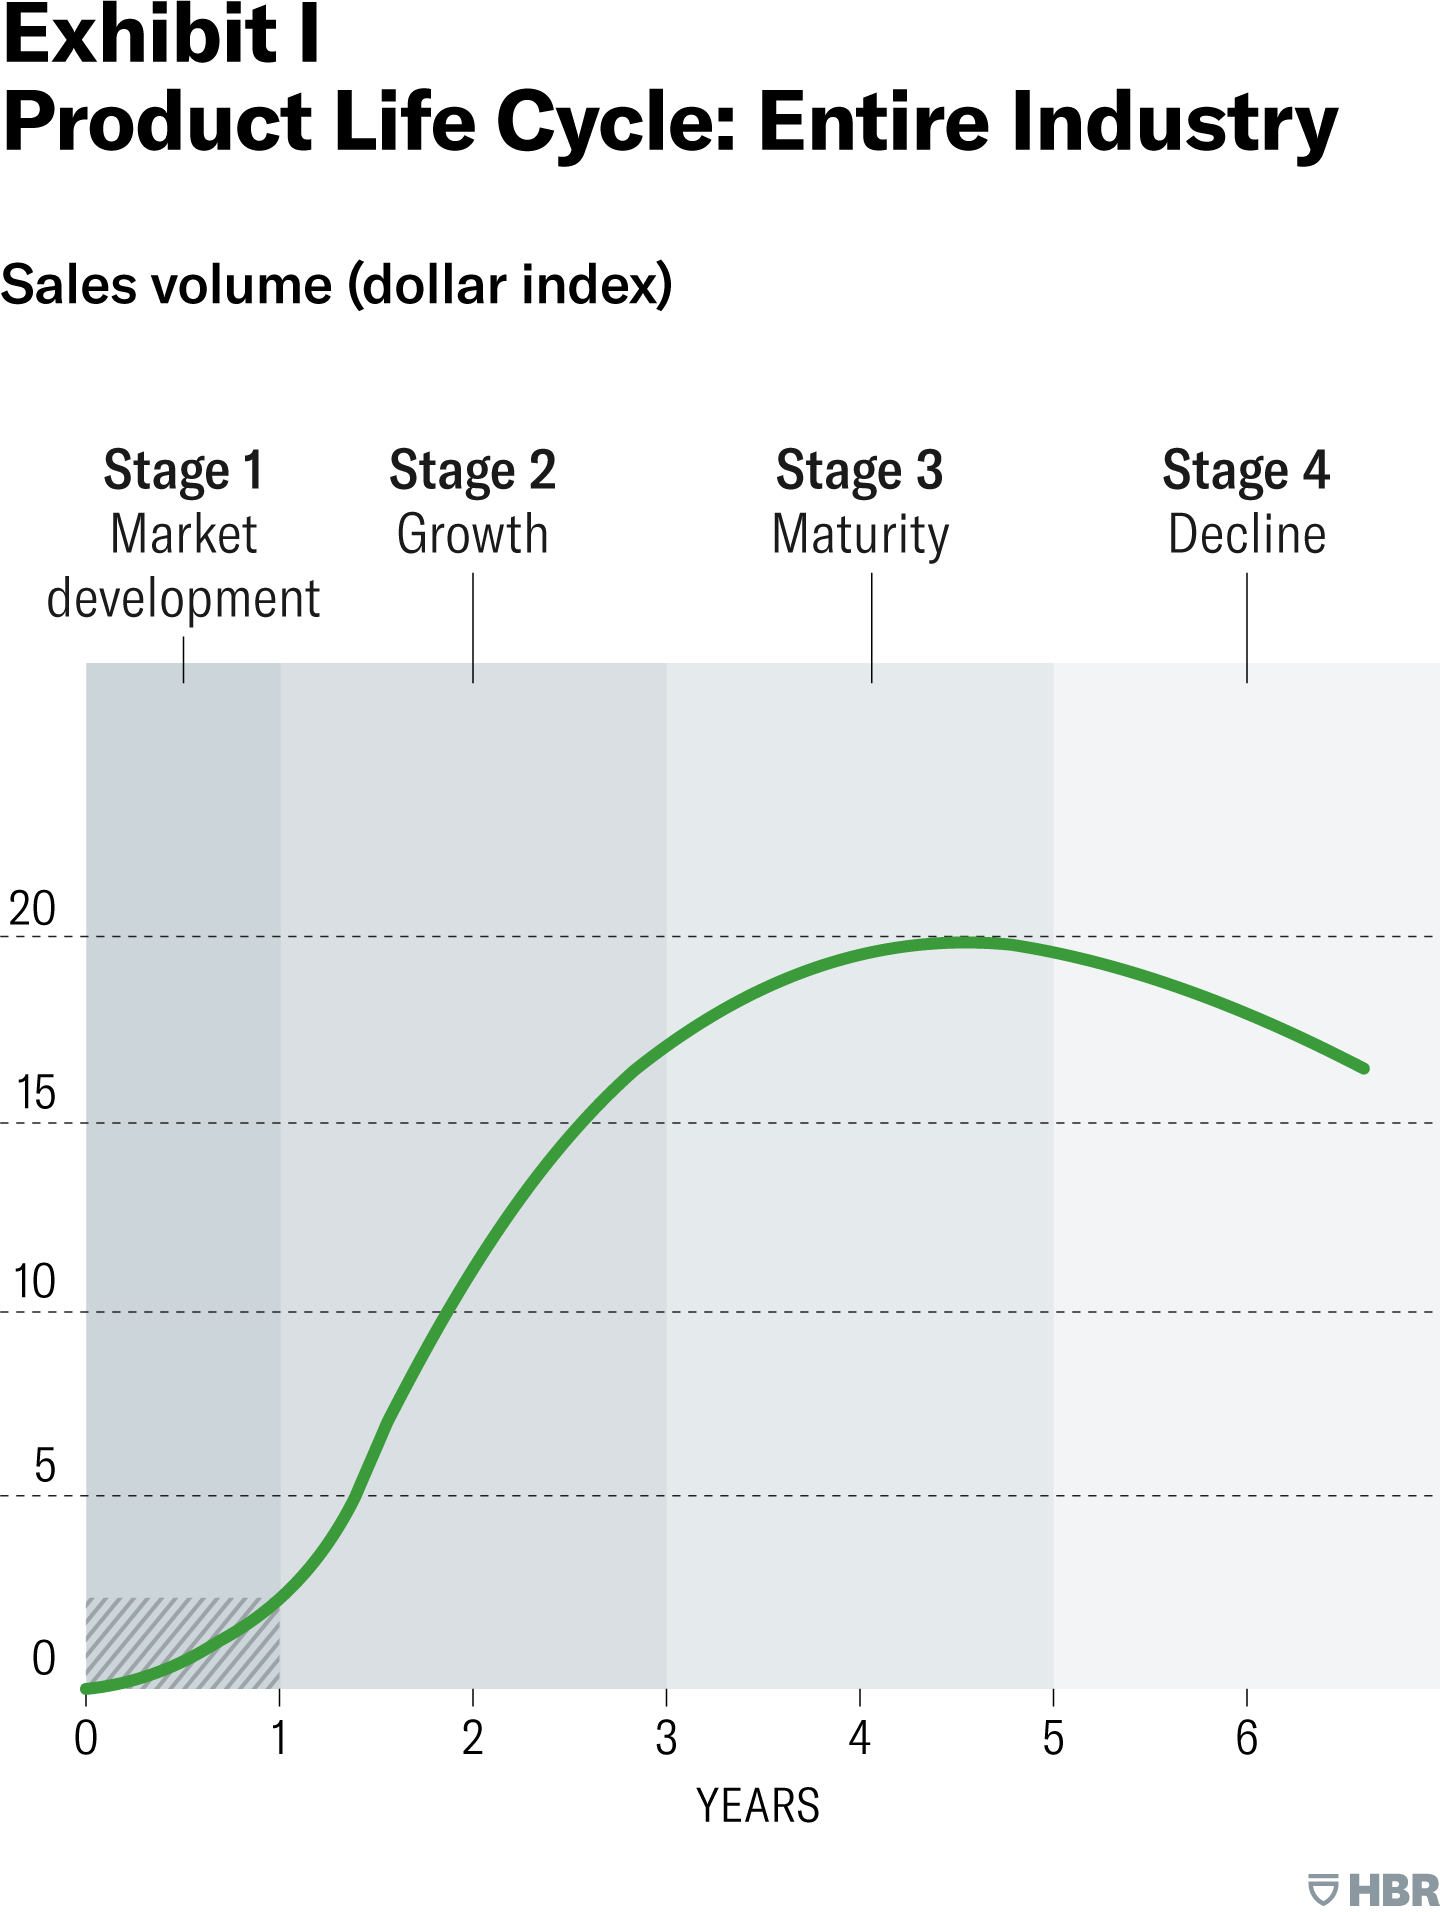 Product Life Cycle: Entire Industry. A line graph shows how a product passes through market stages during its life cycle, based on sales volume measured on the dollar index. Stage 1, or market development, occurs through the first year, and sales volume grows minimally, reaching only about 2.5 on the dollar index. During stage 2, or growth, sales volume rises steeply through the second and third years, reaching about 17 by the end of year 3. At stage 3, or maturity, sales volume peaks and levels off around 20 on the dollar index before beginning to drop at the end of year five, when the product enters stage four, or decline. At this point, sales volume continues to fall through year six and beyond.